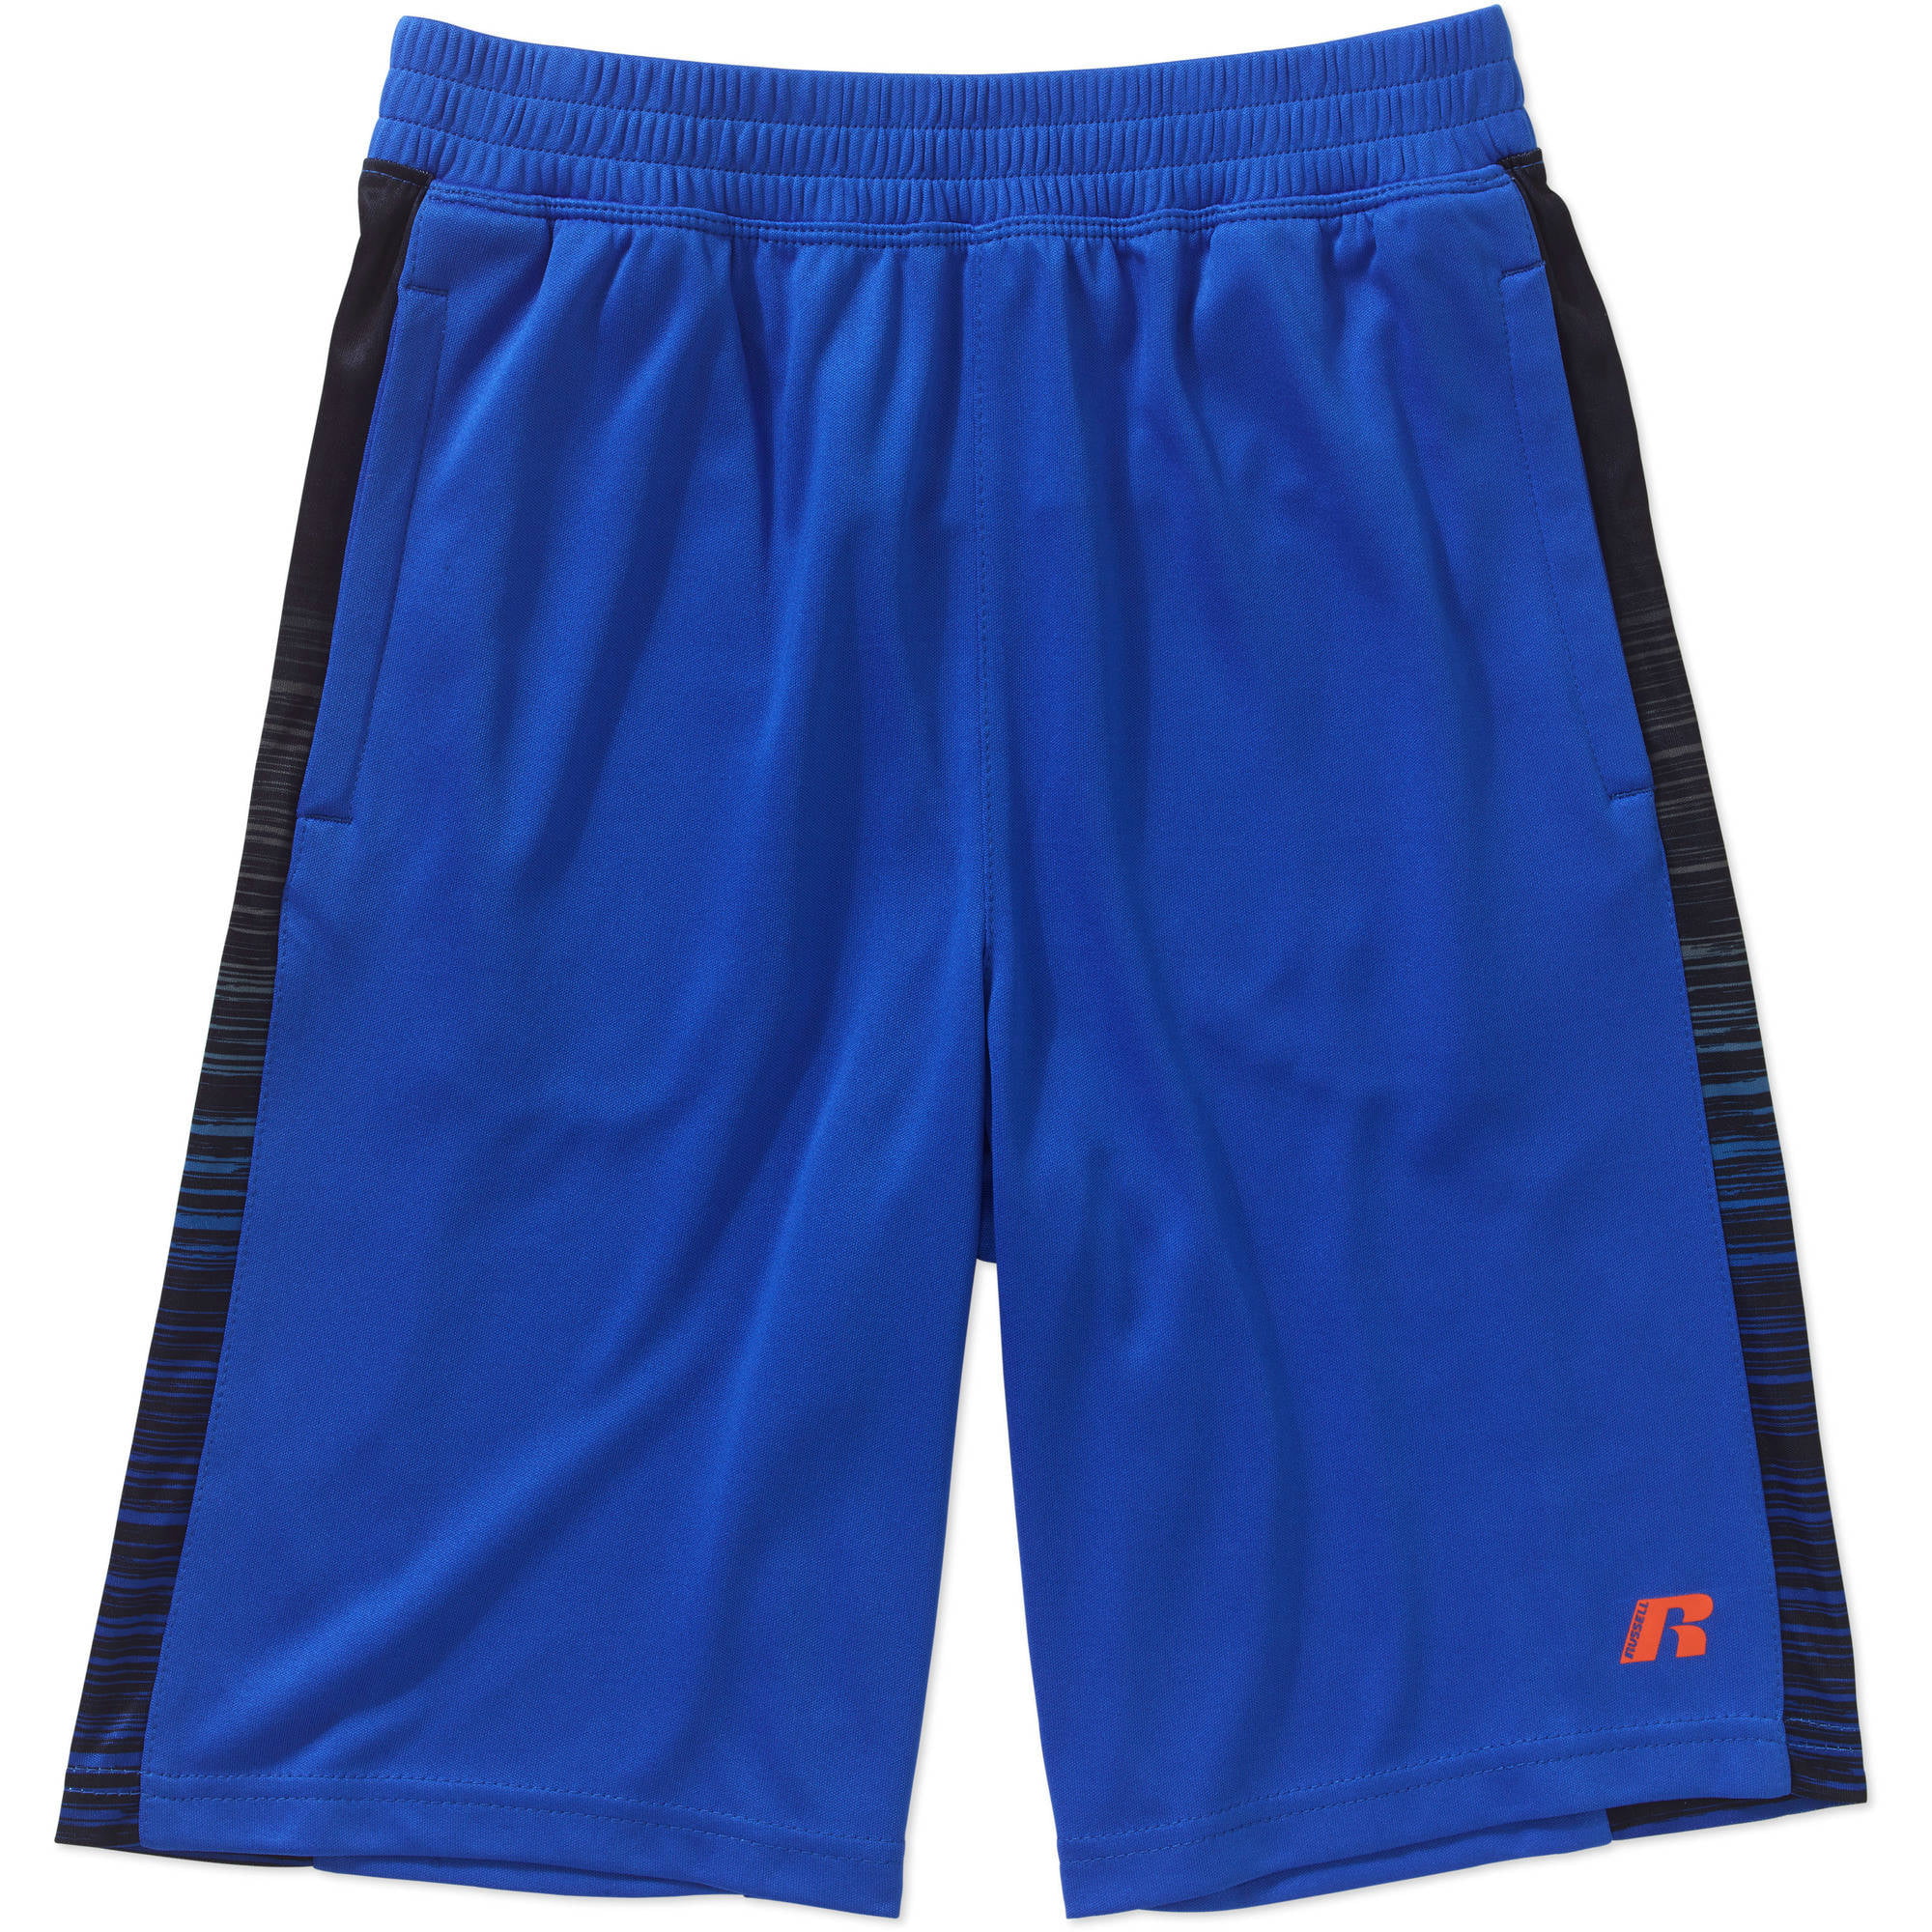 NEW Boys Athletic Shorts Small 6-7 Basketball Workout Gym Running Navy Blue